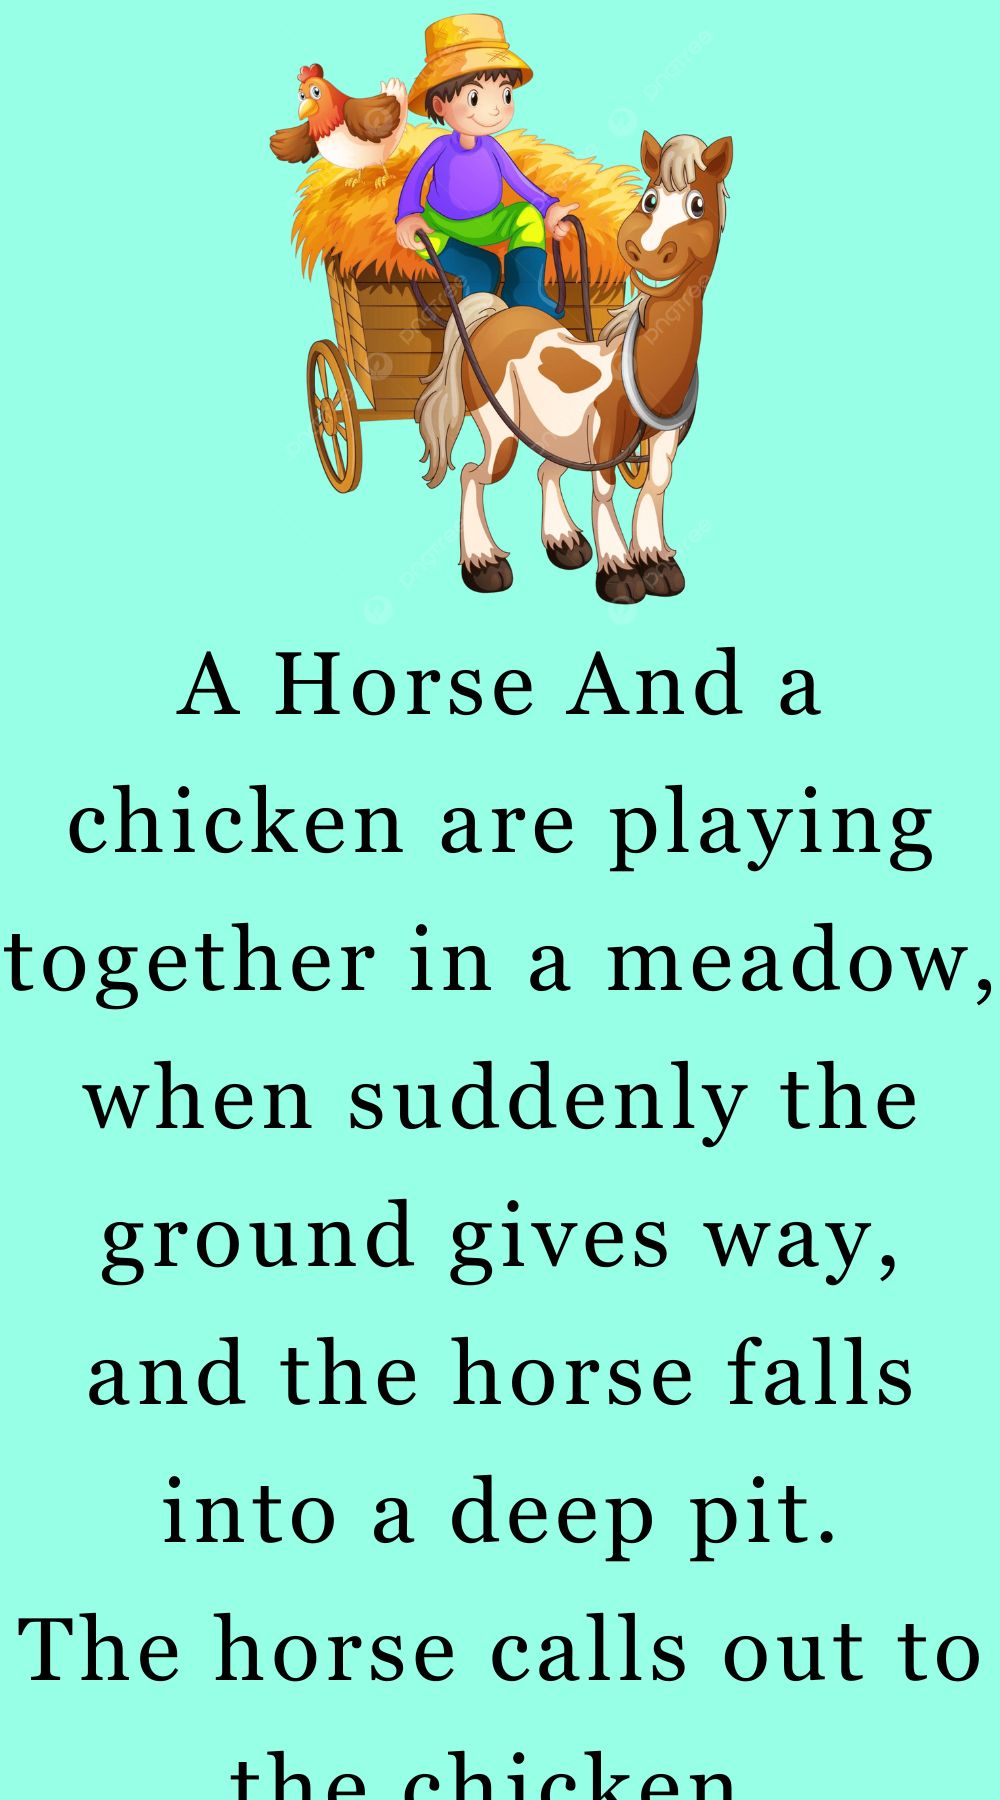 A Horse And a chicken are playing together - funny jokes and humor